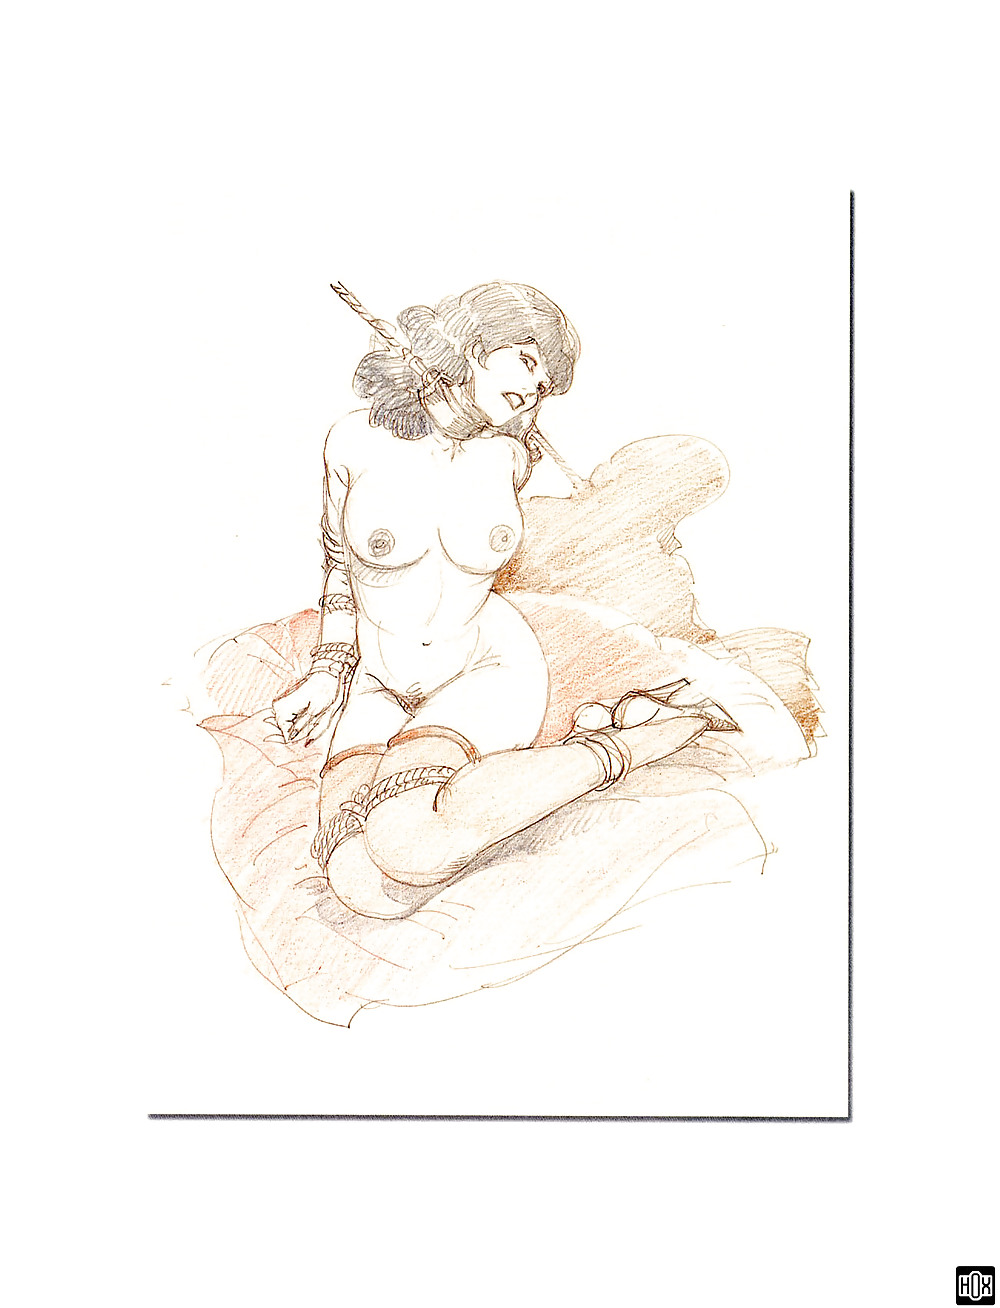 Leone frollo - para complacer
 #36939433